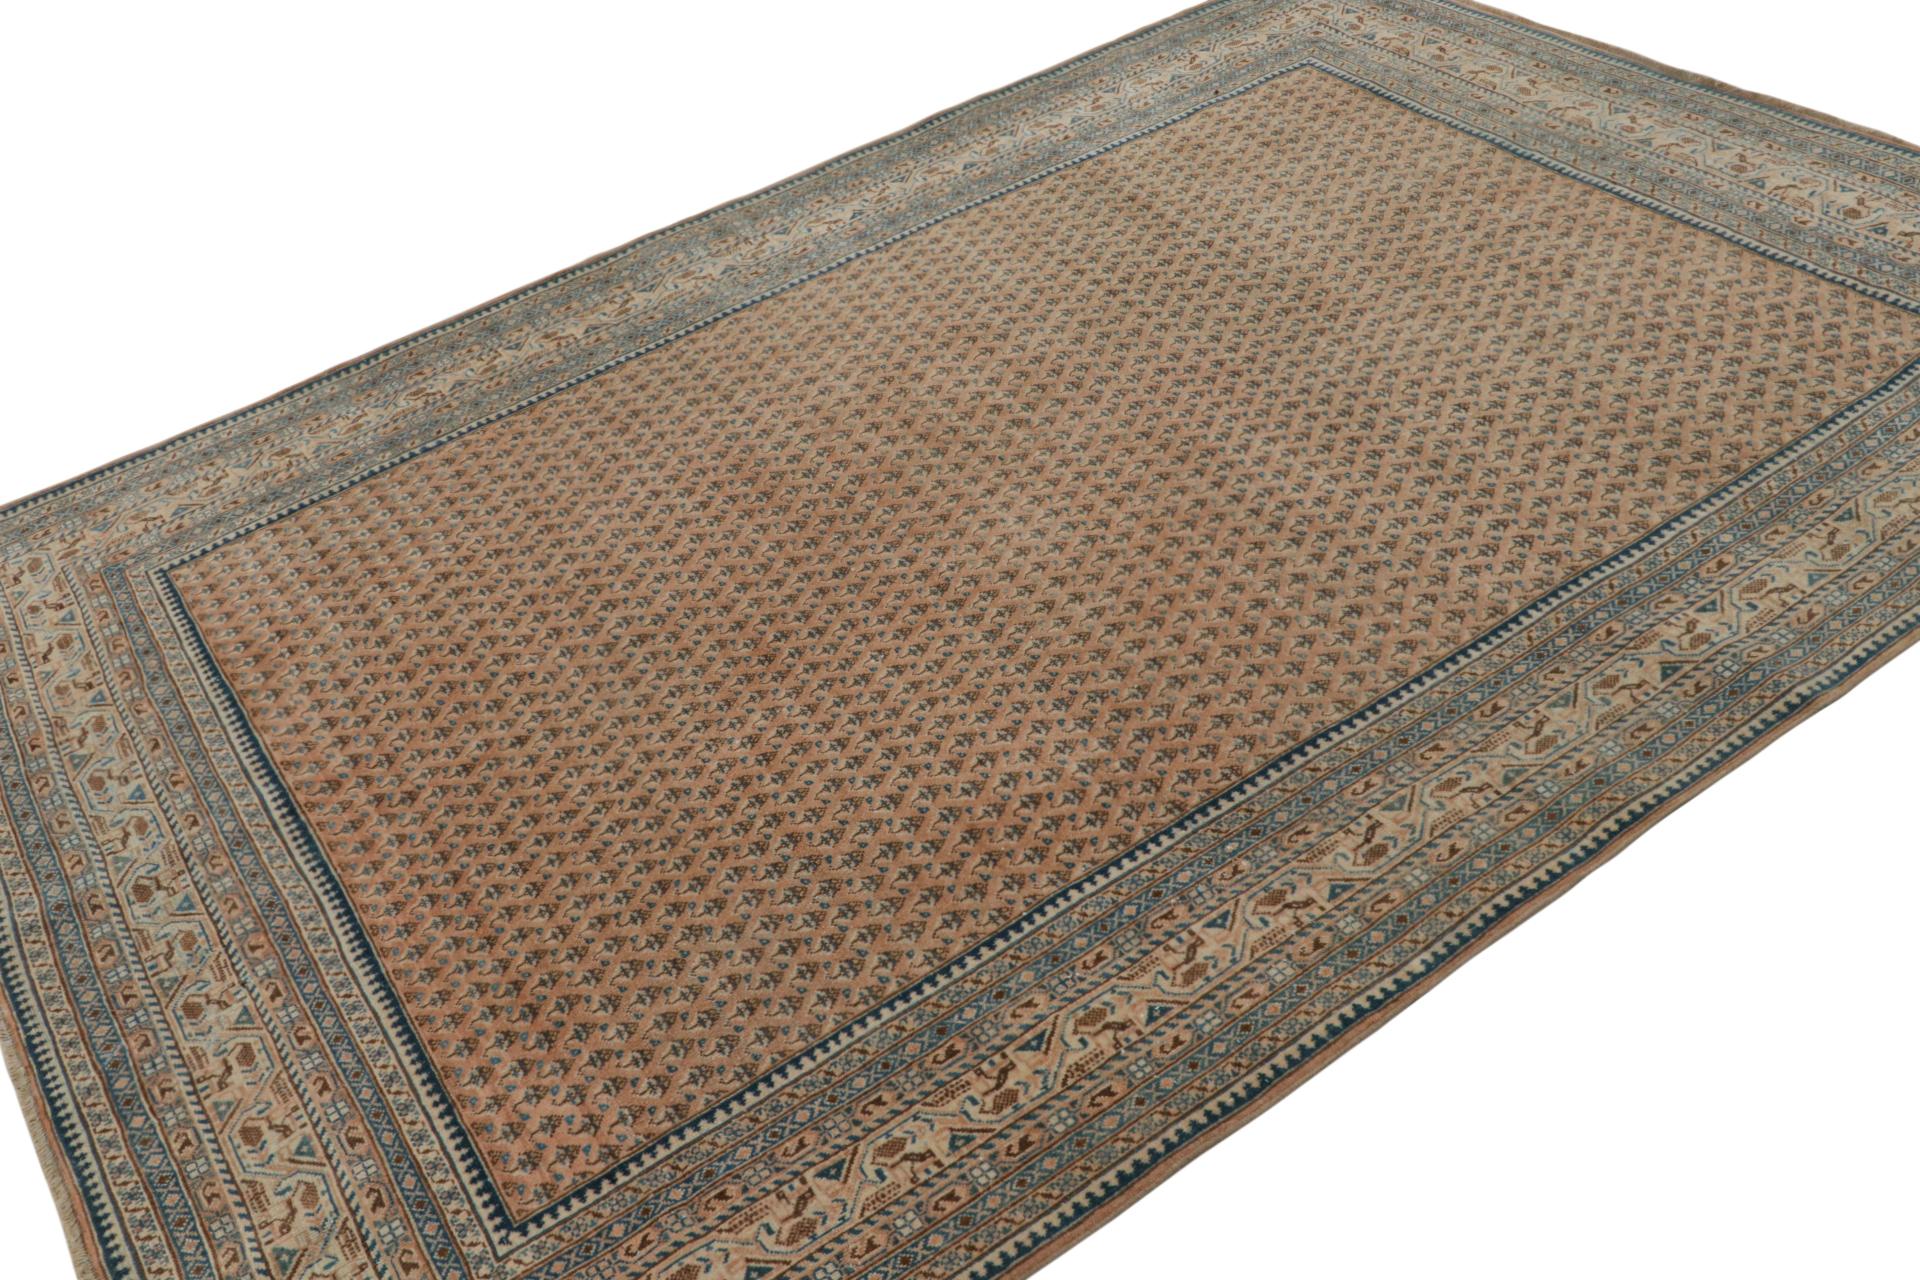 Hand knotted in wool, a 6x9 Indian rug originating circa 1970-1980 - latest to enter Rug & Kilim’s vintage selections.

On the Design:

This rug is a younger vintage adaptation of time-honored patterns, such as this geometric paisley repeating in